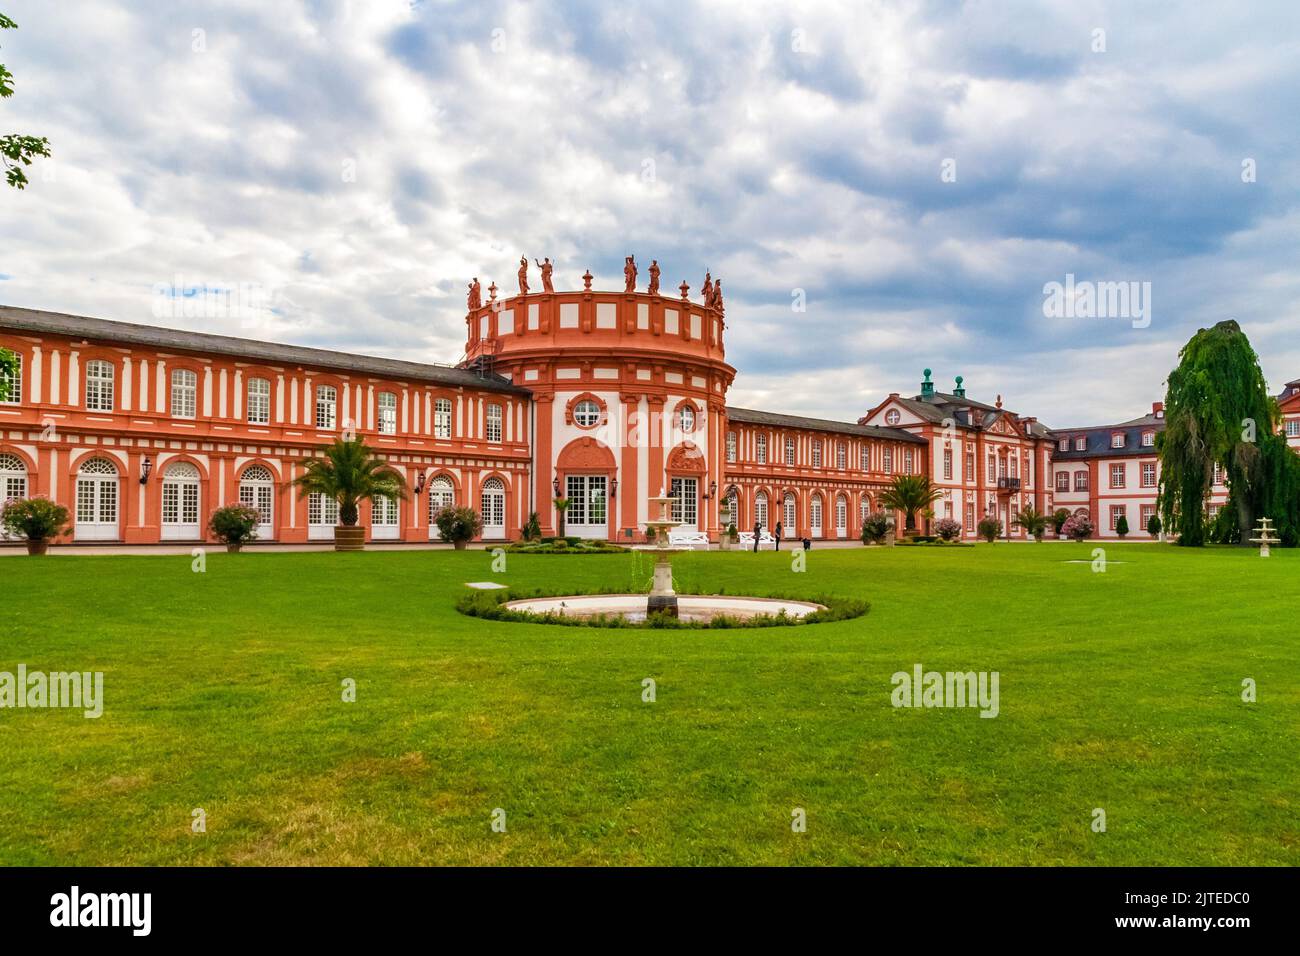 Picturesque view of the famous Biebrich Palace with the rotunda, the west wing, the eastern cascade fountain and the old weeping beech tree in the... Stock Photo